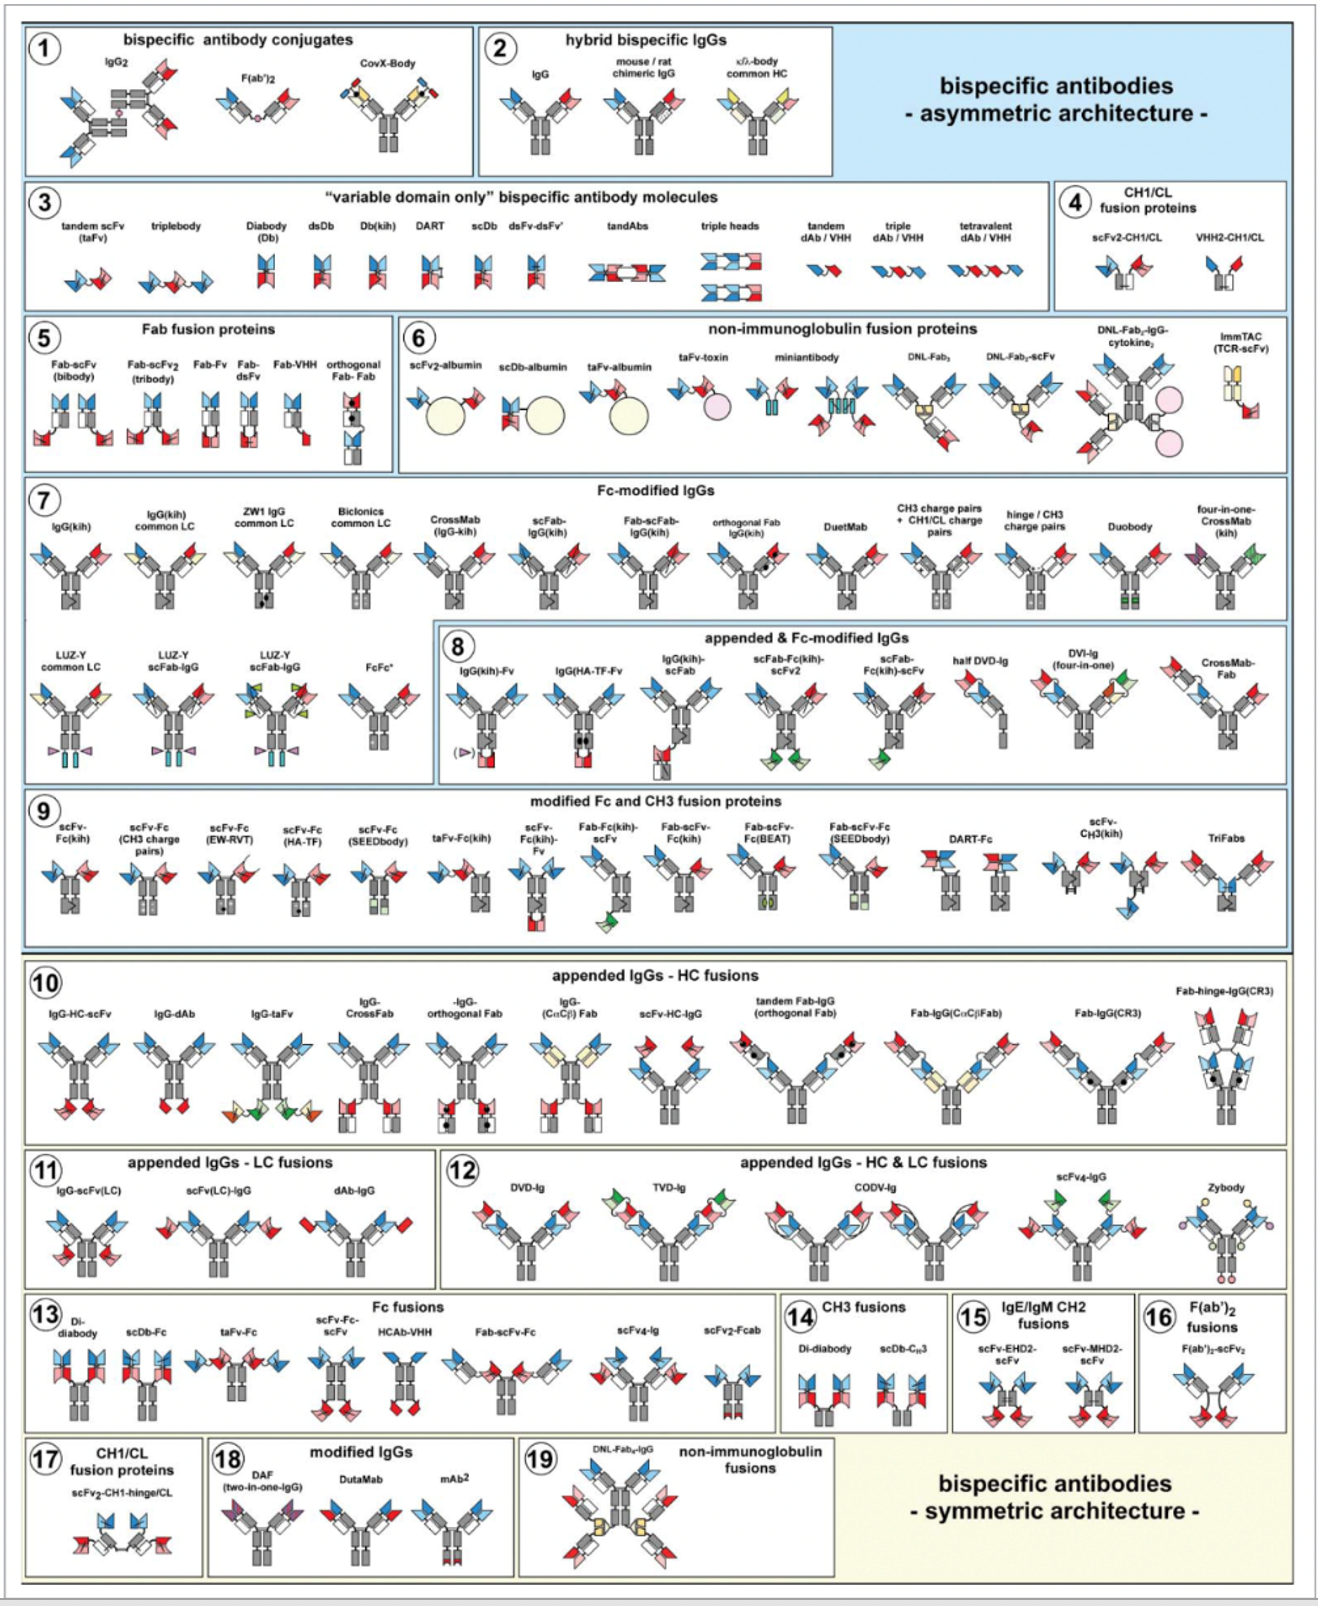 Figure 2: The zoo of bispecific antibody formats. Overview of bispecific antibody formats reduced to practice, grouped into molecules with symmetric or asymmetric architecture. (Image credit: Brinkmann and Kontermann. MAbs. 2017 Feb-Mar; 9(2): 182–212)4